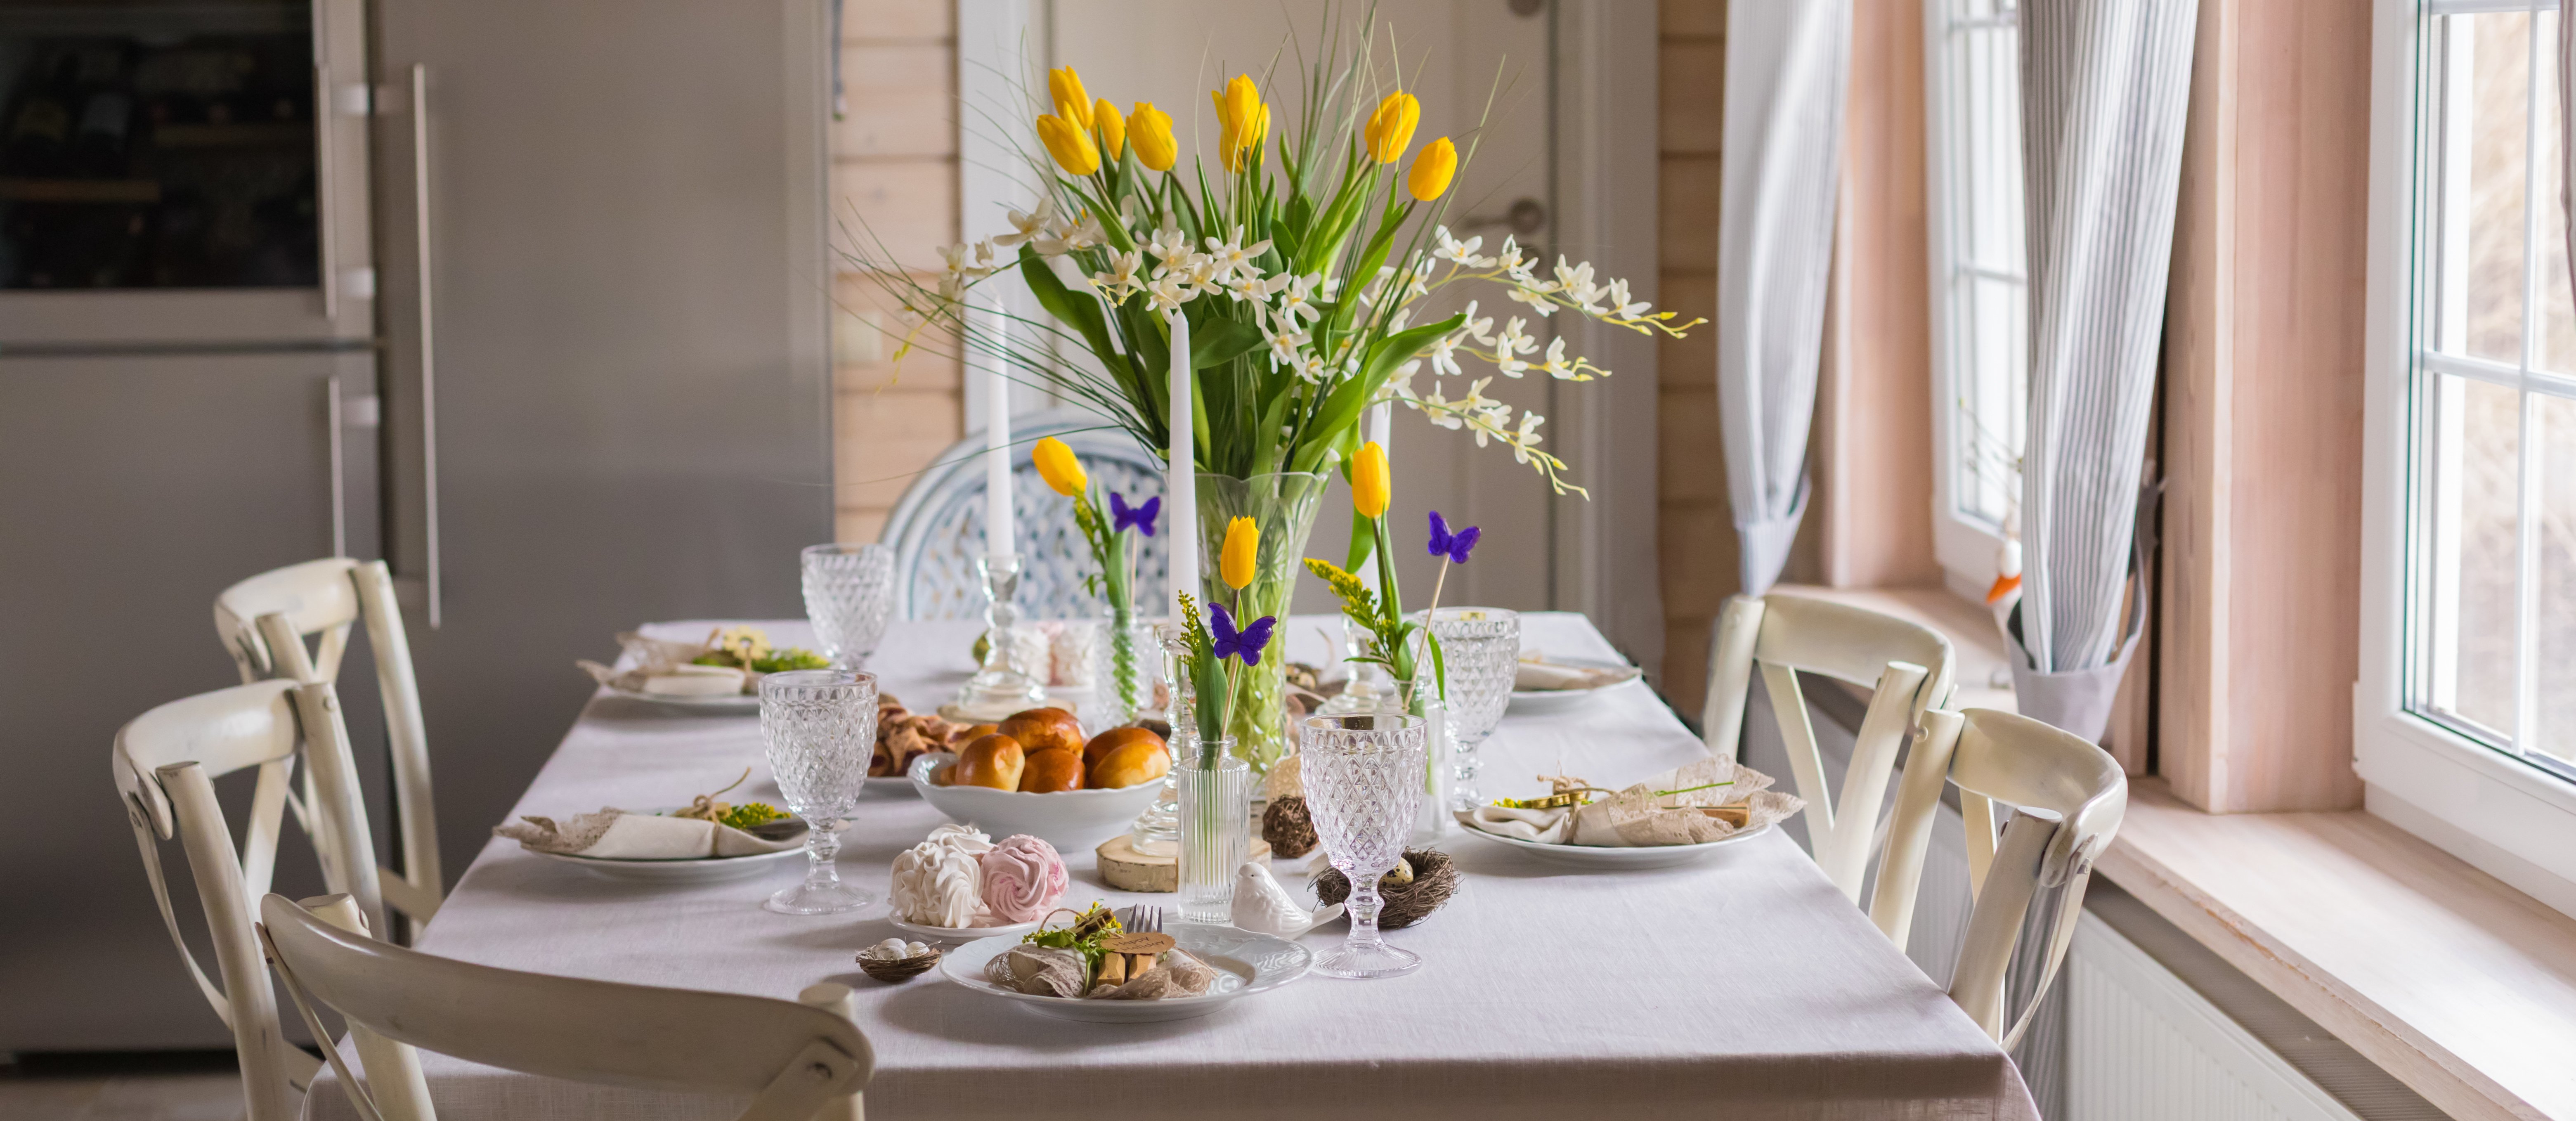 Easter festive spring table setting decoration, eggs in nest, fresh yellow tulips in vase, marshmallows, feathers, family dinner or breakfast concept, toned